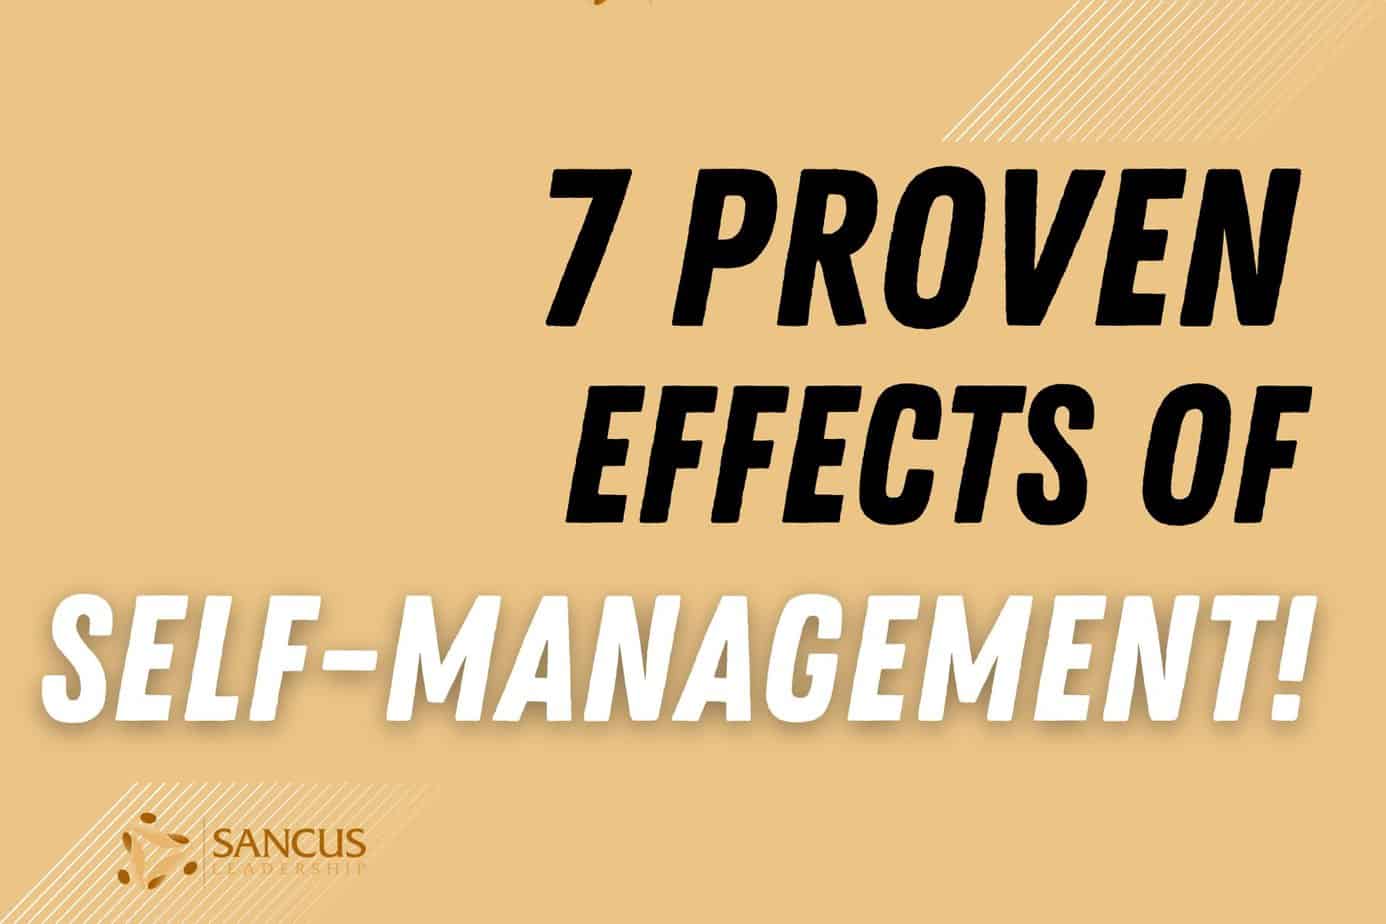 7 Proven Effects of Self-Management! (For Leaders)